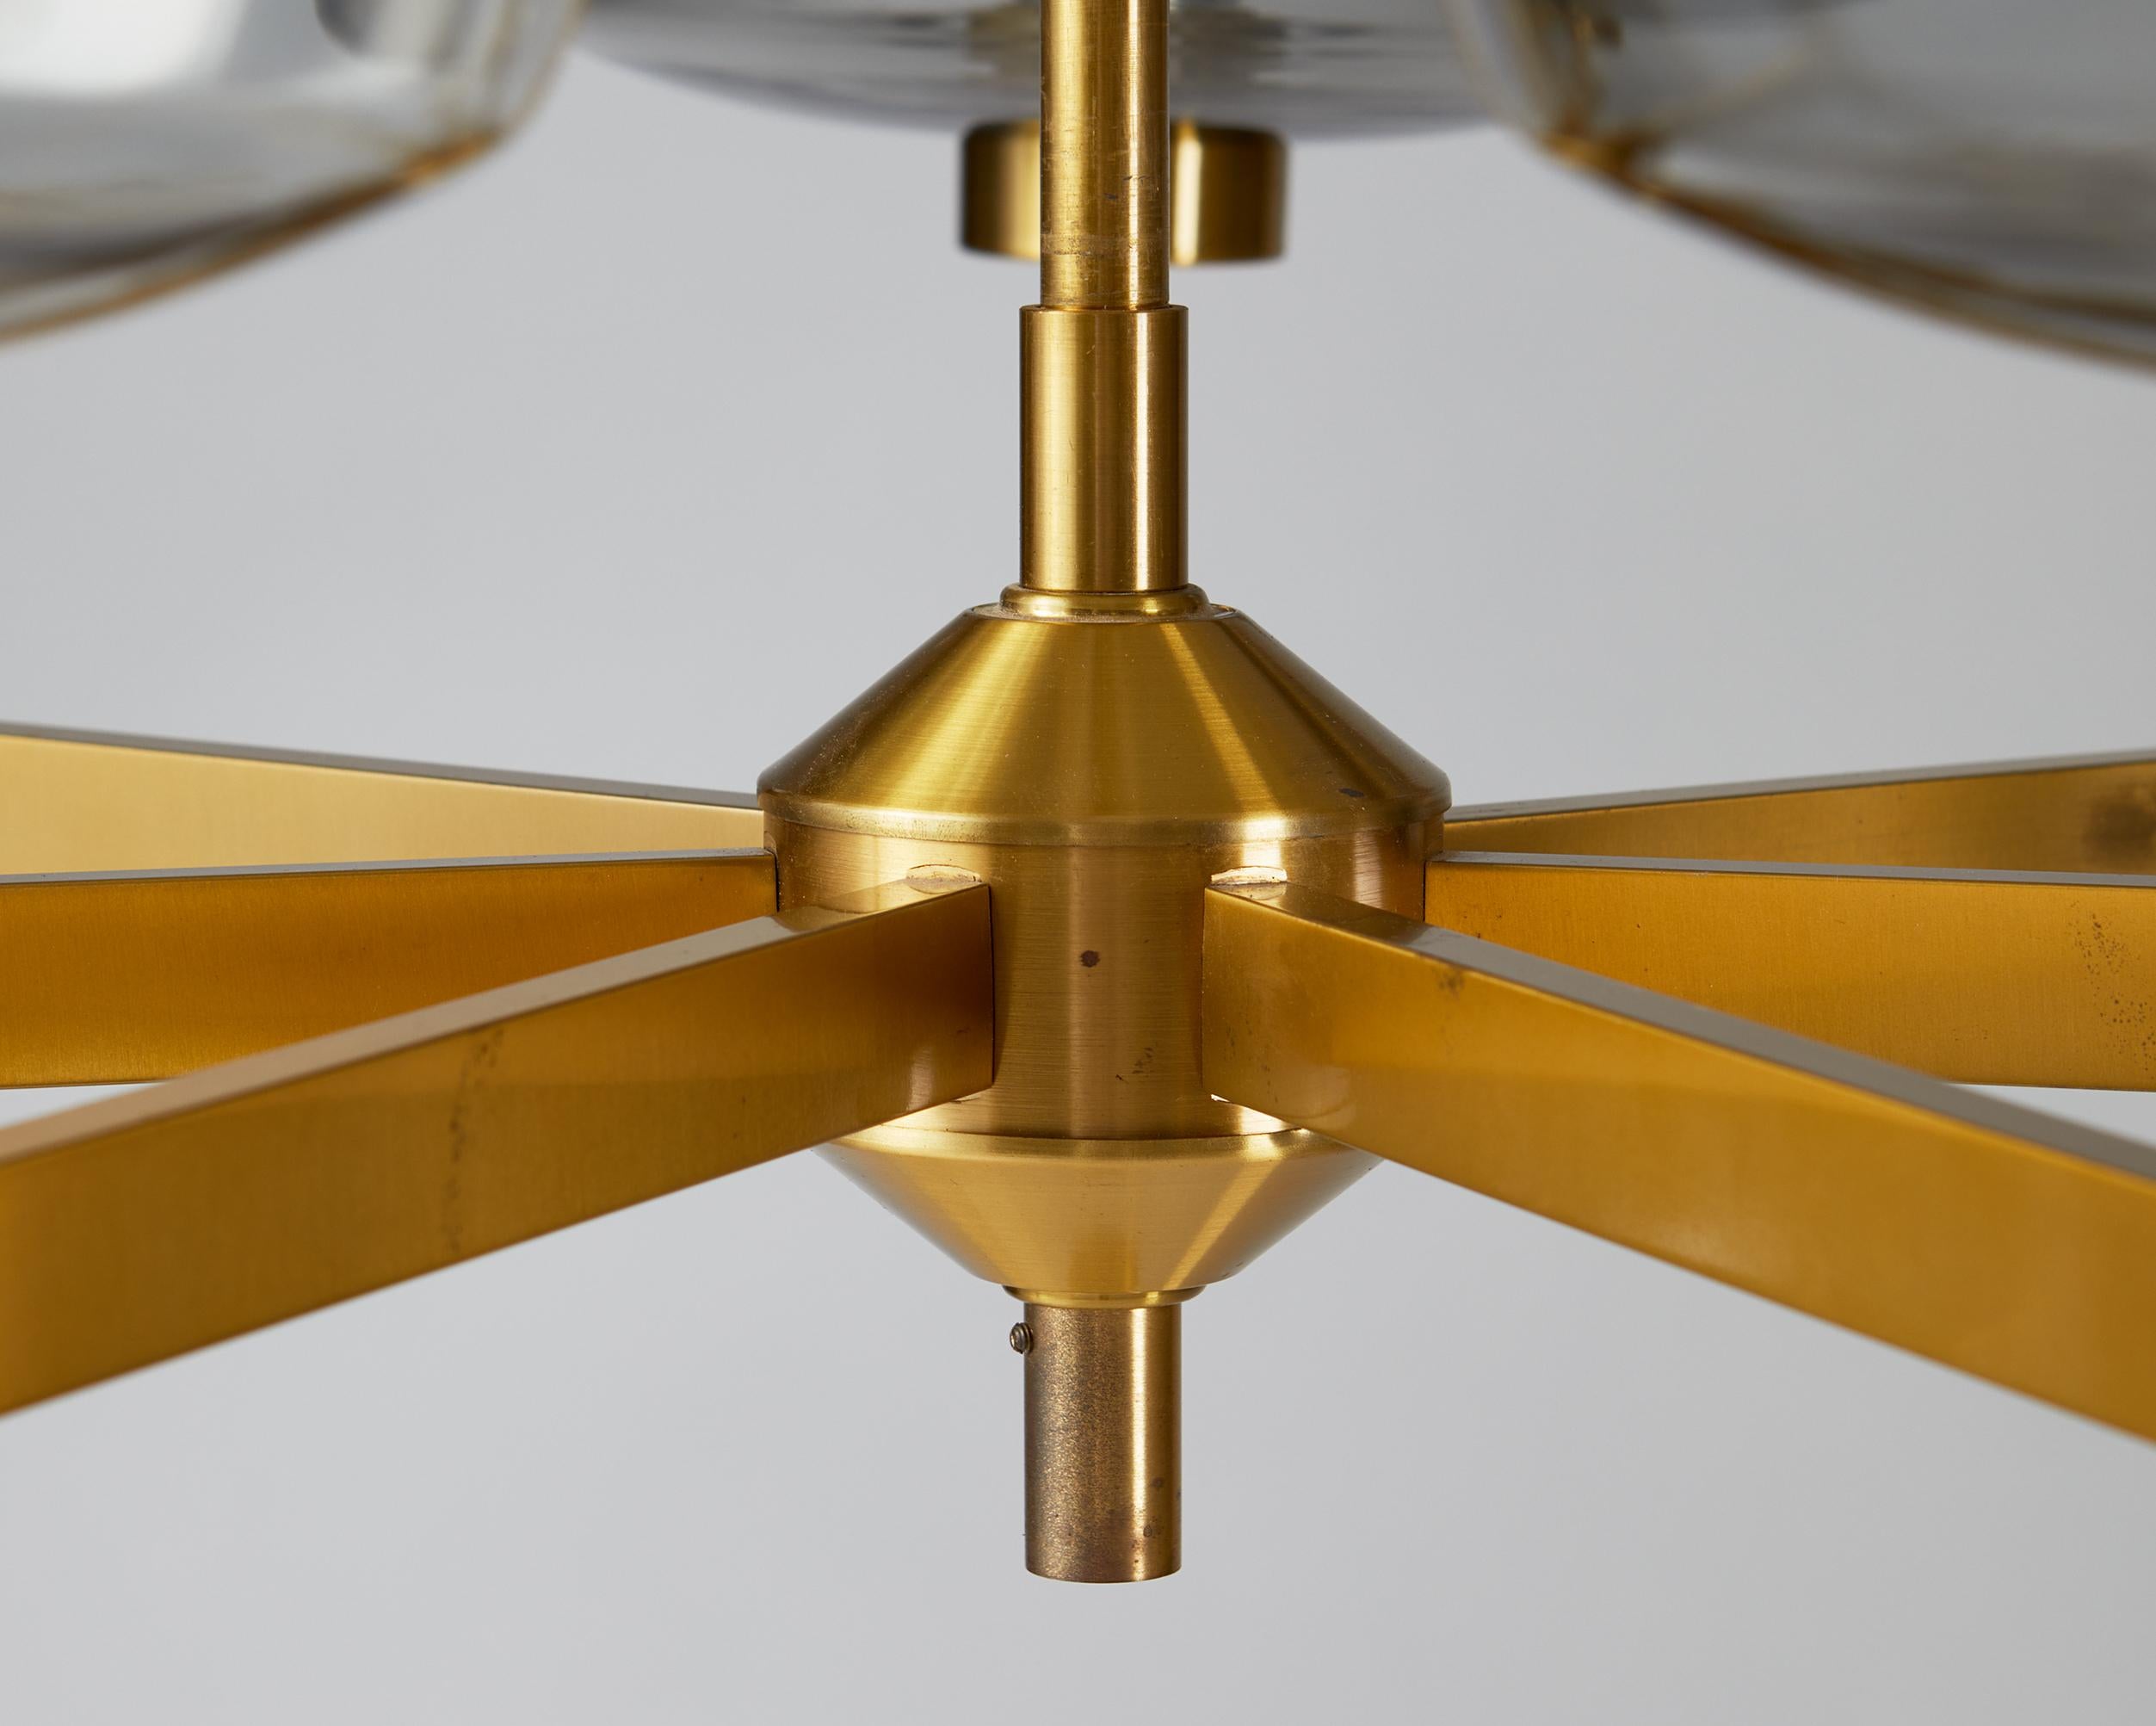 Mid-20th Century Ceiling Lamp Attributed to Hans Agne-Jakobsson, Sweden, 1960's